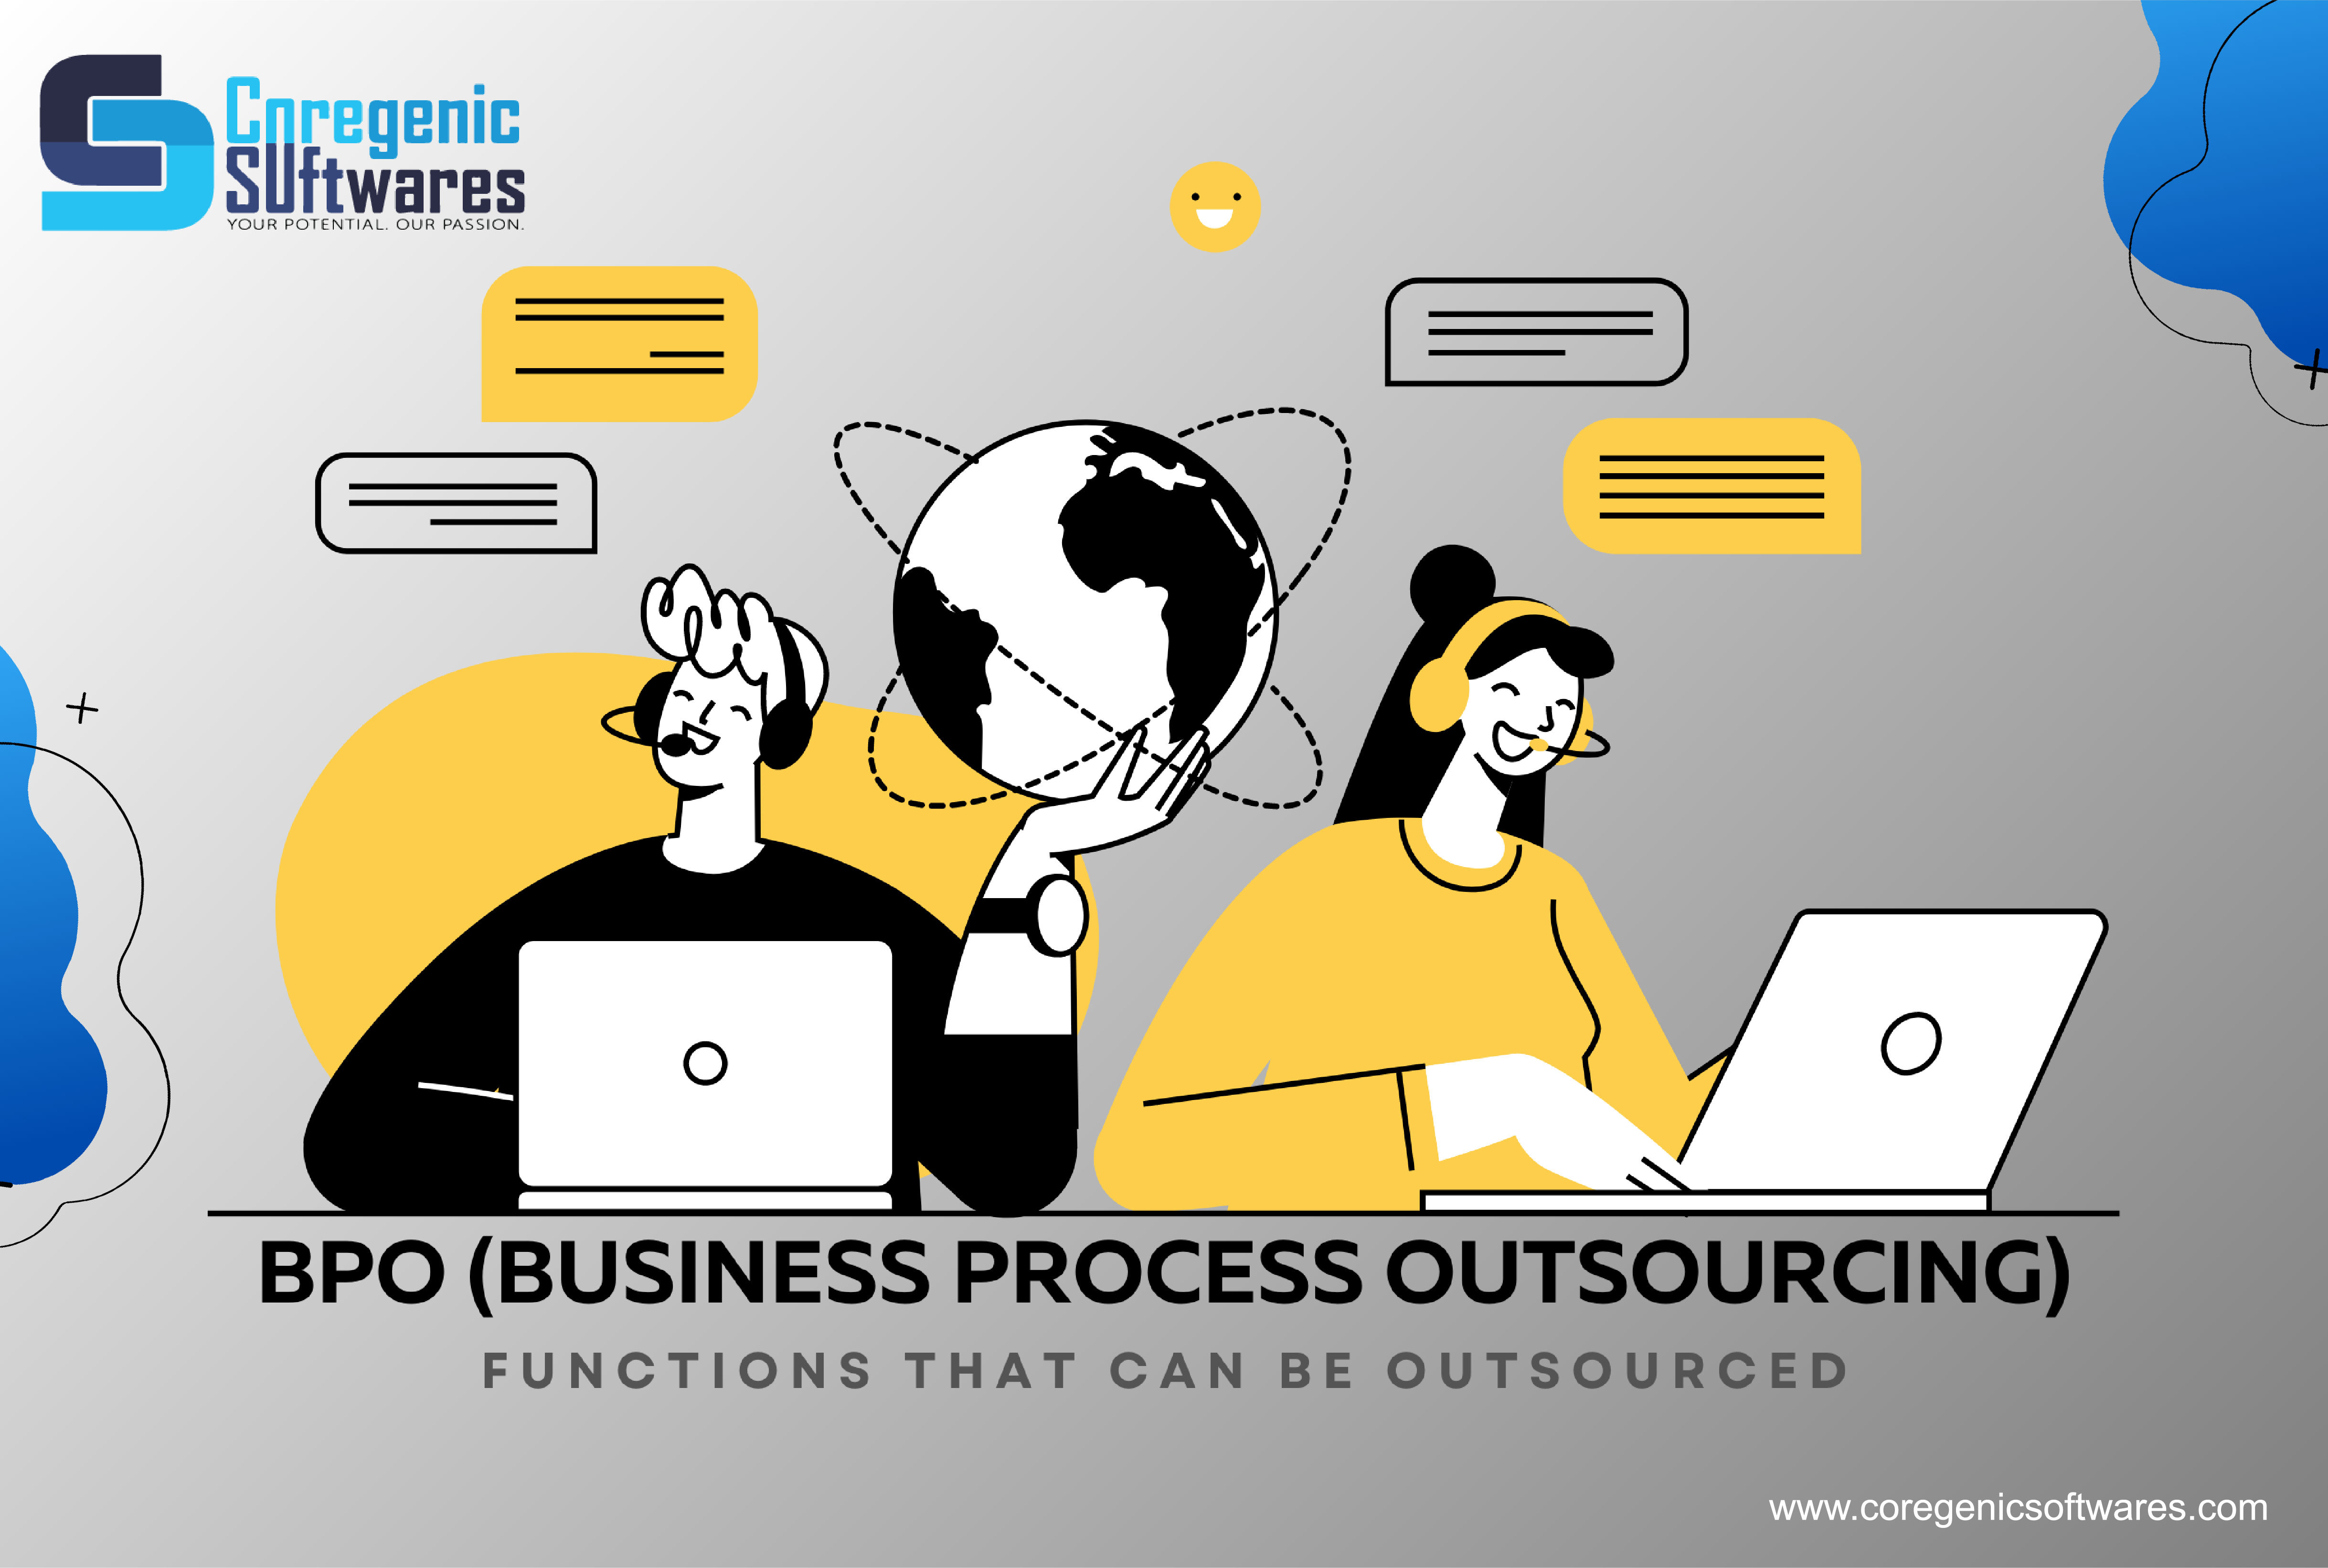 Top 4 Business Functions In Business Process Outsourcing